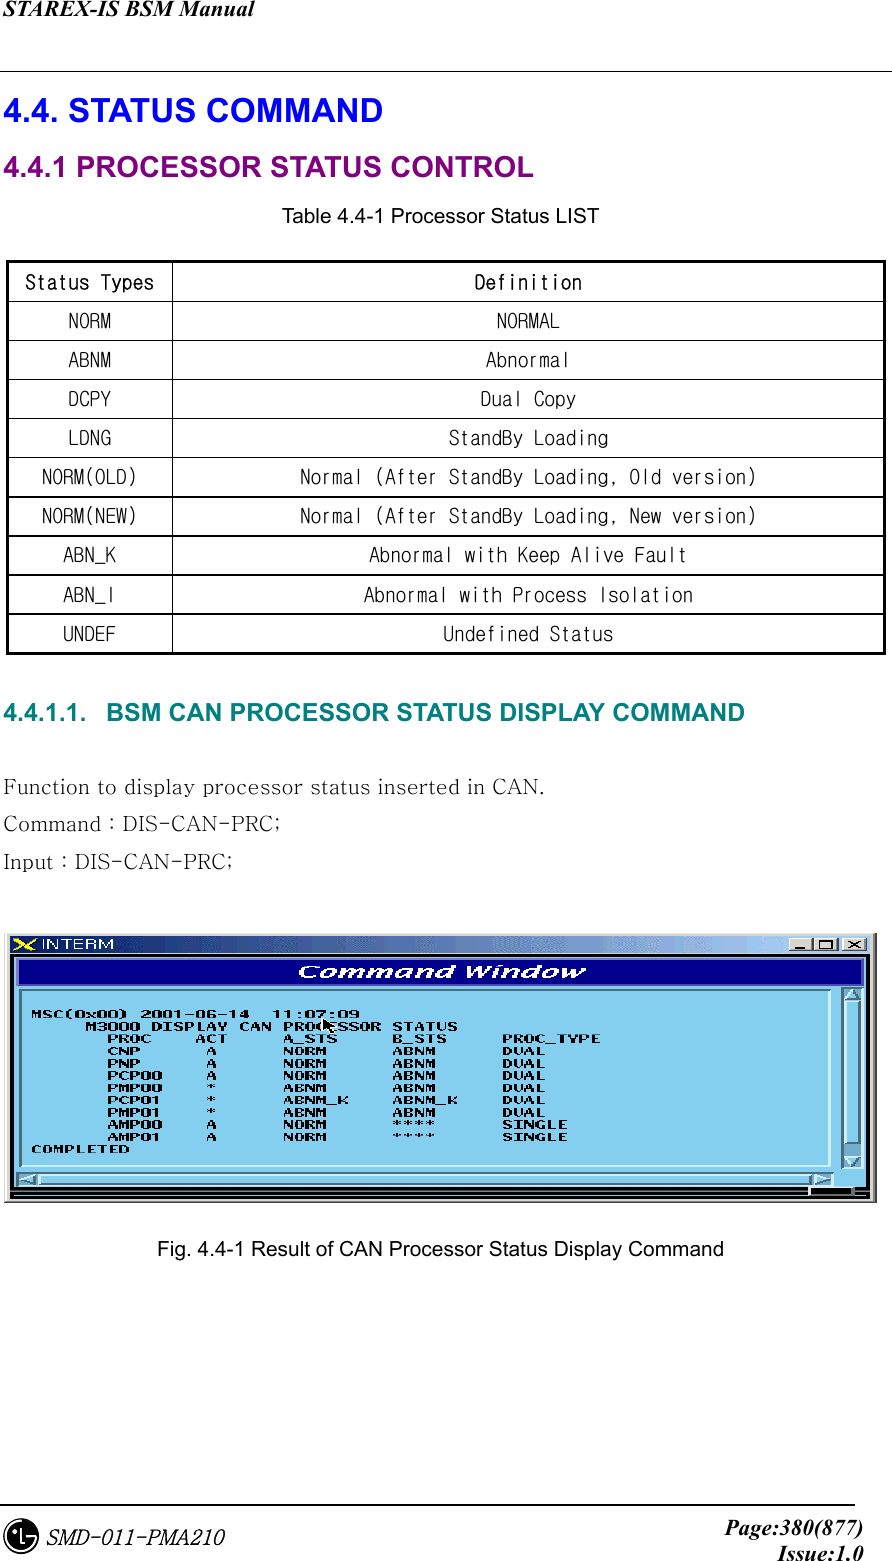 STAREX-IS BSM Manual     Page:380(877)Issue:1.0SMD-011-PMA210 4.4. STATUS COMMAND 4.4.1 PROCESSOR STATUS CONTROL Table 4.4-1 Processor Status LIST Status Types  Definition NORM  NORMAL ABNM  Abnormal DCPY  Dual Copy LDNG  StandBy Loading NORM(OLD)  Normal (After StandBy Loading, Old version) NORM(NEW)  Normal (After StandBy Loading, New version) ABN_K  Abnormal with Keep Alive Fault ABN_I  Abnormal with Process Isolation UNDEF  Undefined Status  4.4.1.1.   BSM CAN PROCESSOR STATUS DISPLAY COMMAND  Function to display processor status inserted in CAN. Command : DIS-CAN-PRC; Input : DIS-CAN-PRC;   Fig. 4.4-1 Result of CAN Processor Status Display Command       